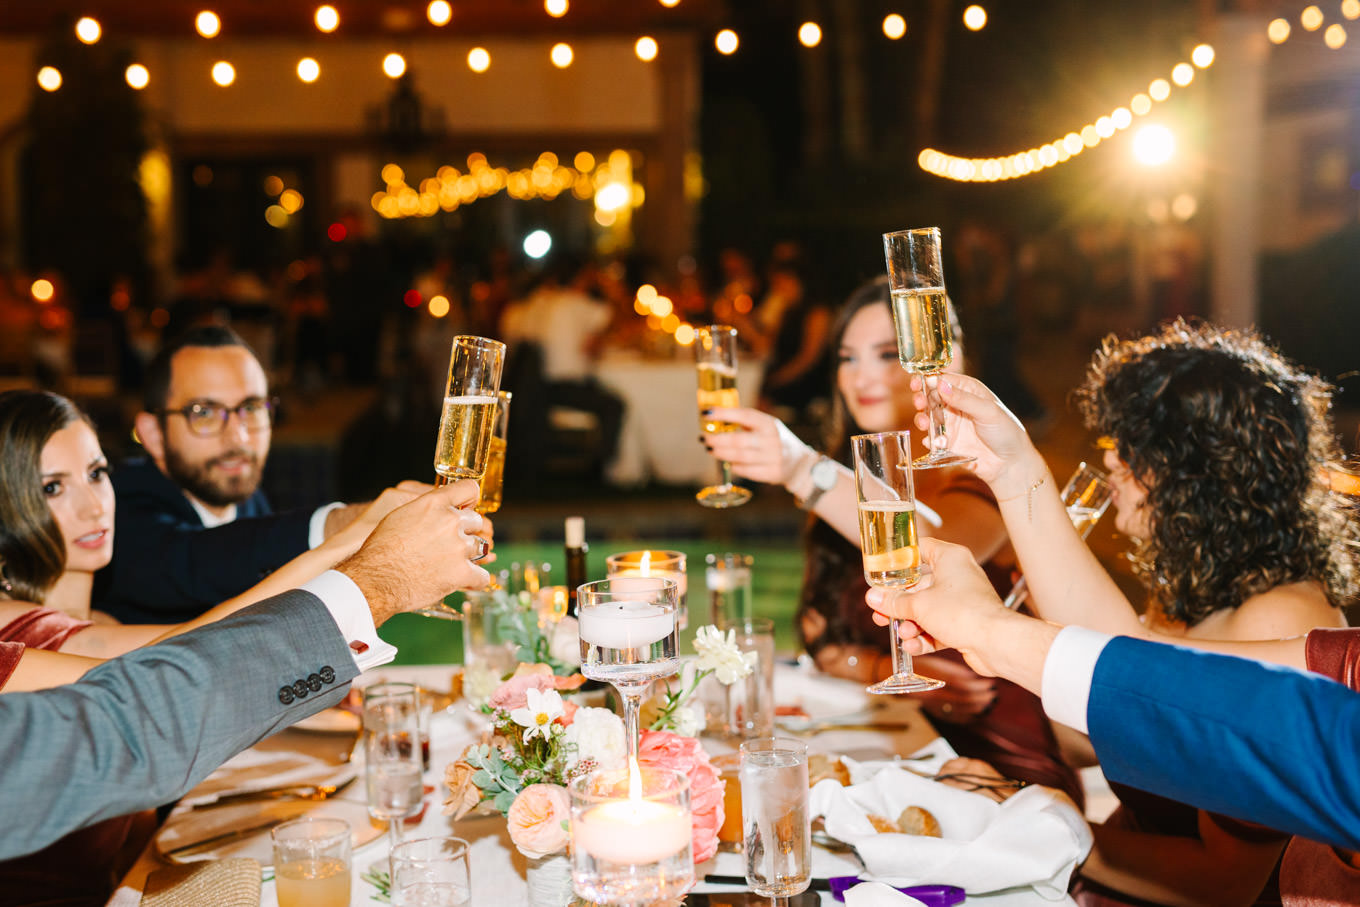 Guests toasting | Pink Bougainvillea Estate wedding | Colorful LA wedding photography | #bougainvilleaestate #palmspringswedding #palmspringsweddingvenue #palmspringsphotographer Source: Mary Costa Photography | Los Angeles